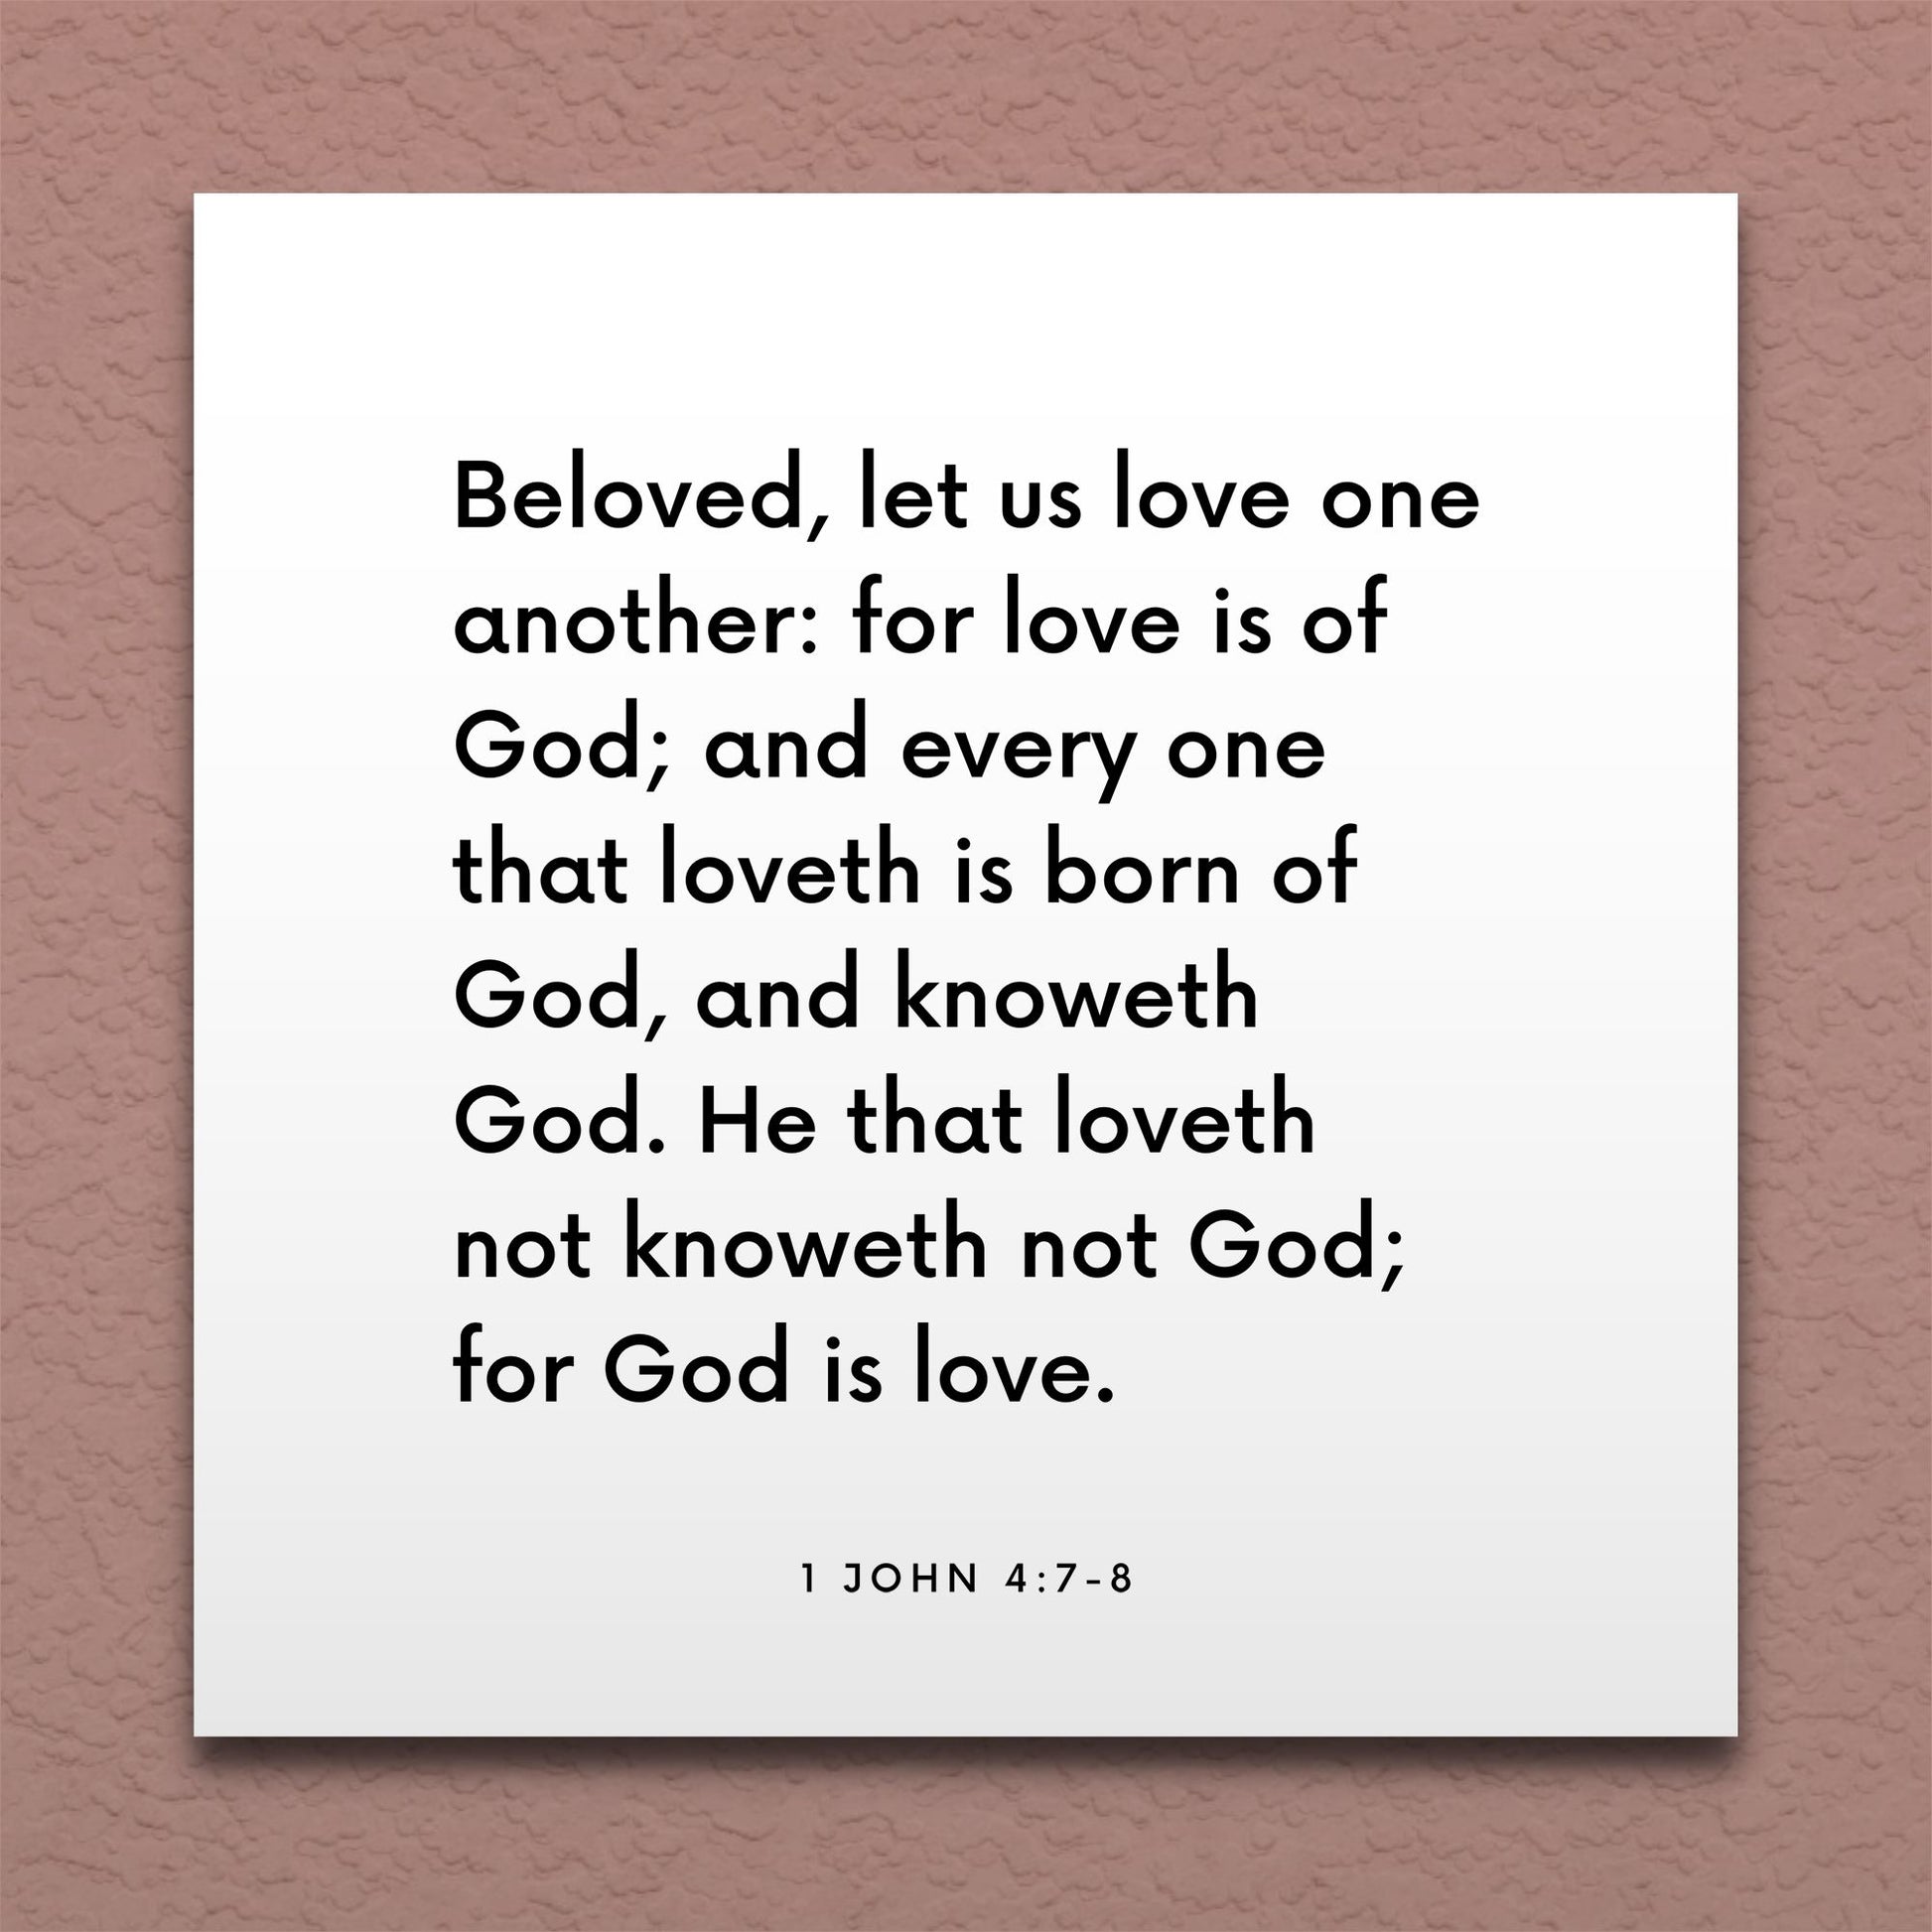 Wall-mounted scripture tile for 1 John 4:7-8 - "Beloved, let us love one another: for love is of God"